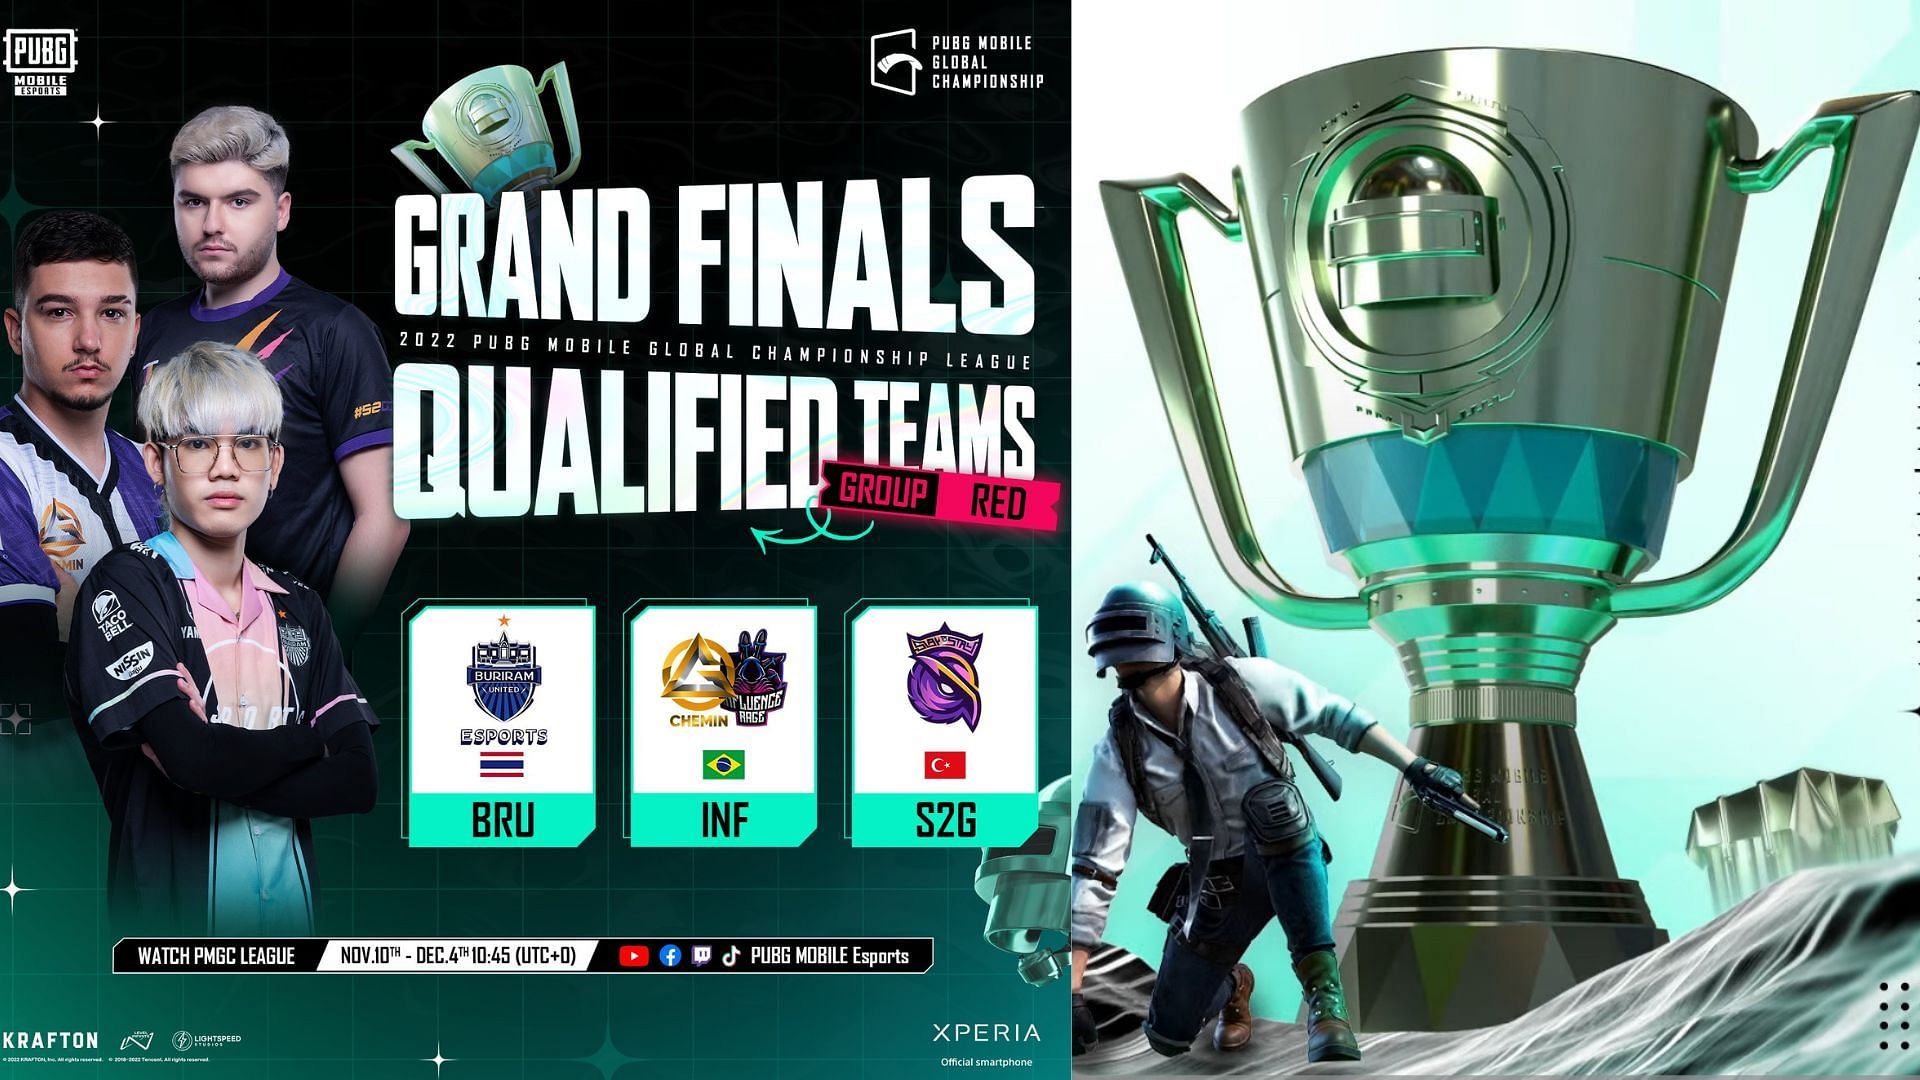 Three teams from Group Red reached PMGC Grand Finals (Image via PUBG Mobile)